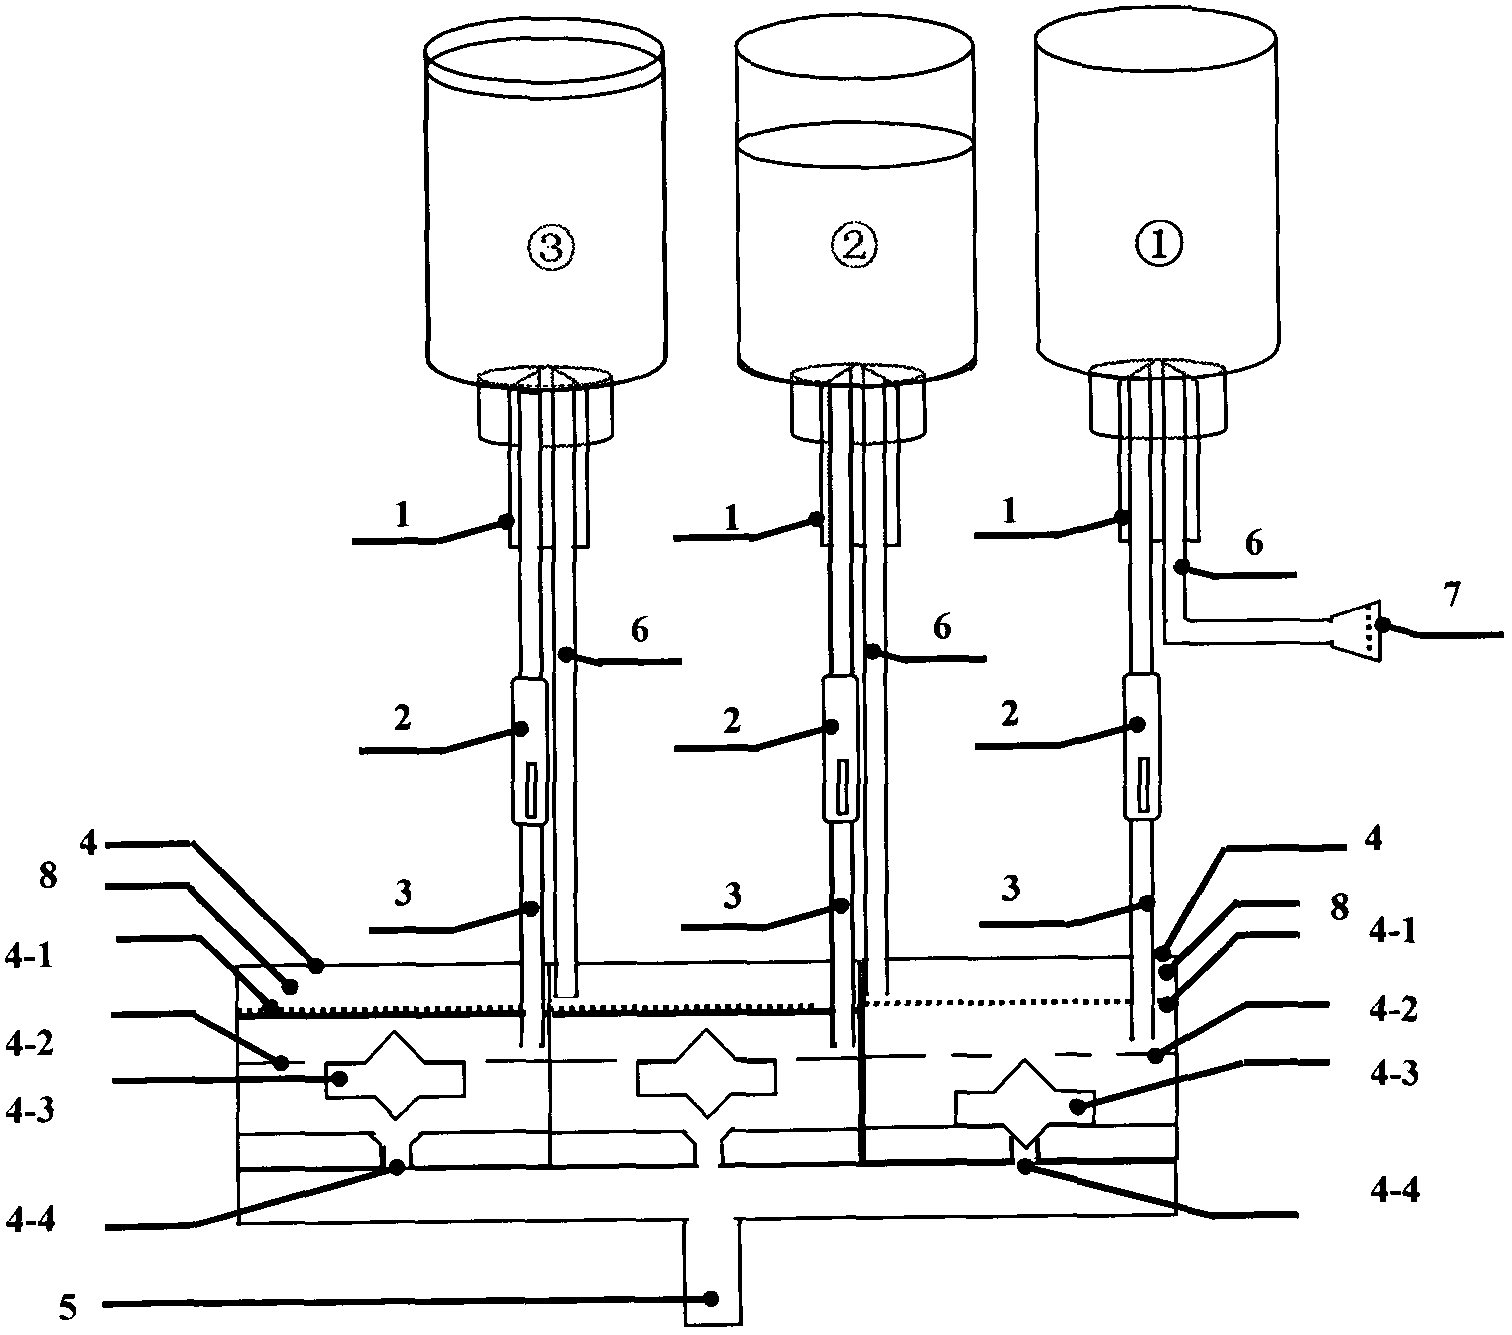 Transfusion device having automatic bottle change and safety protection functions